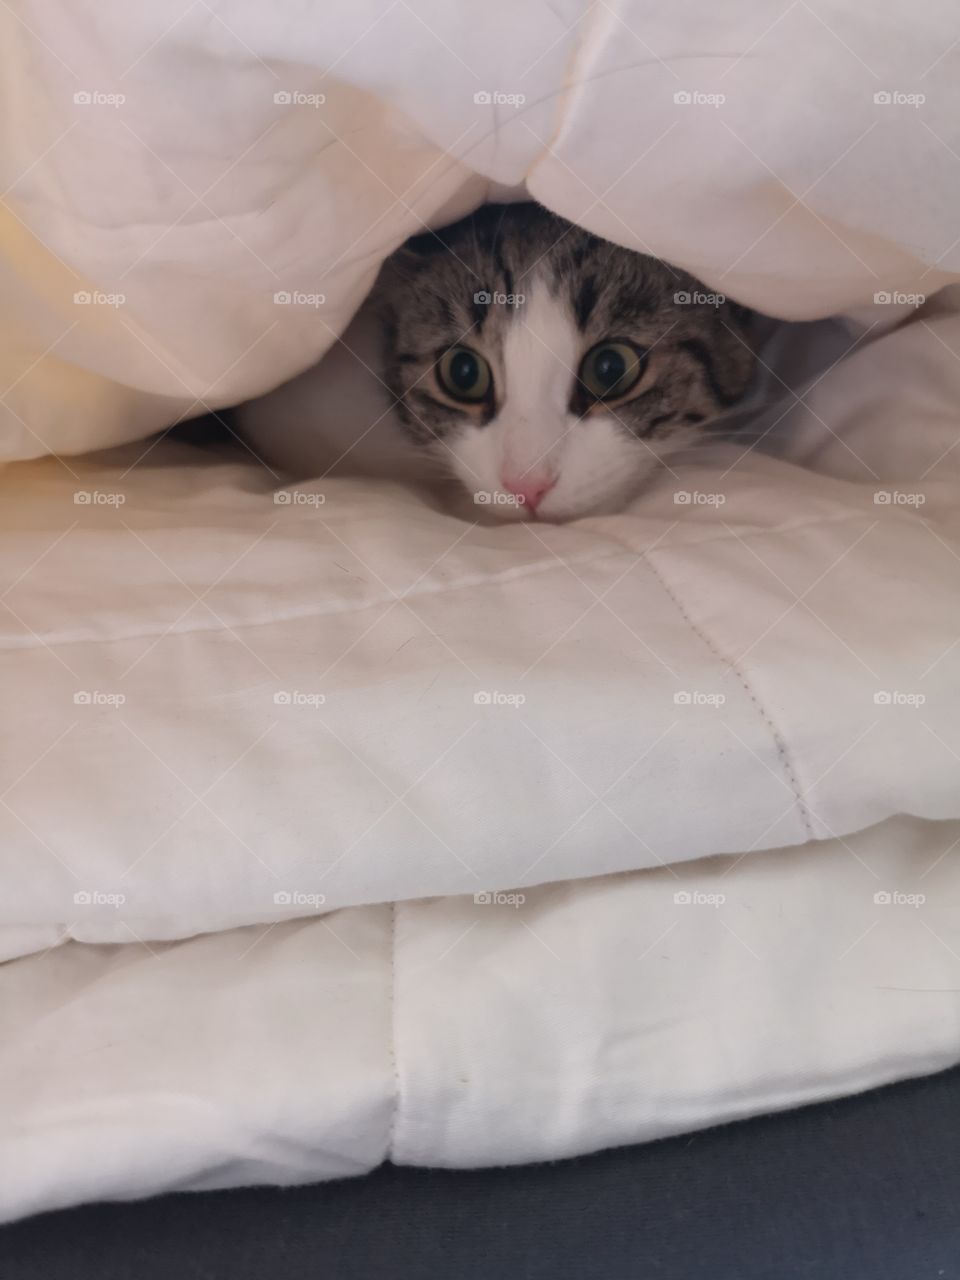 Playing under cover lol.